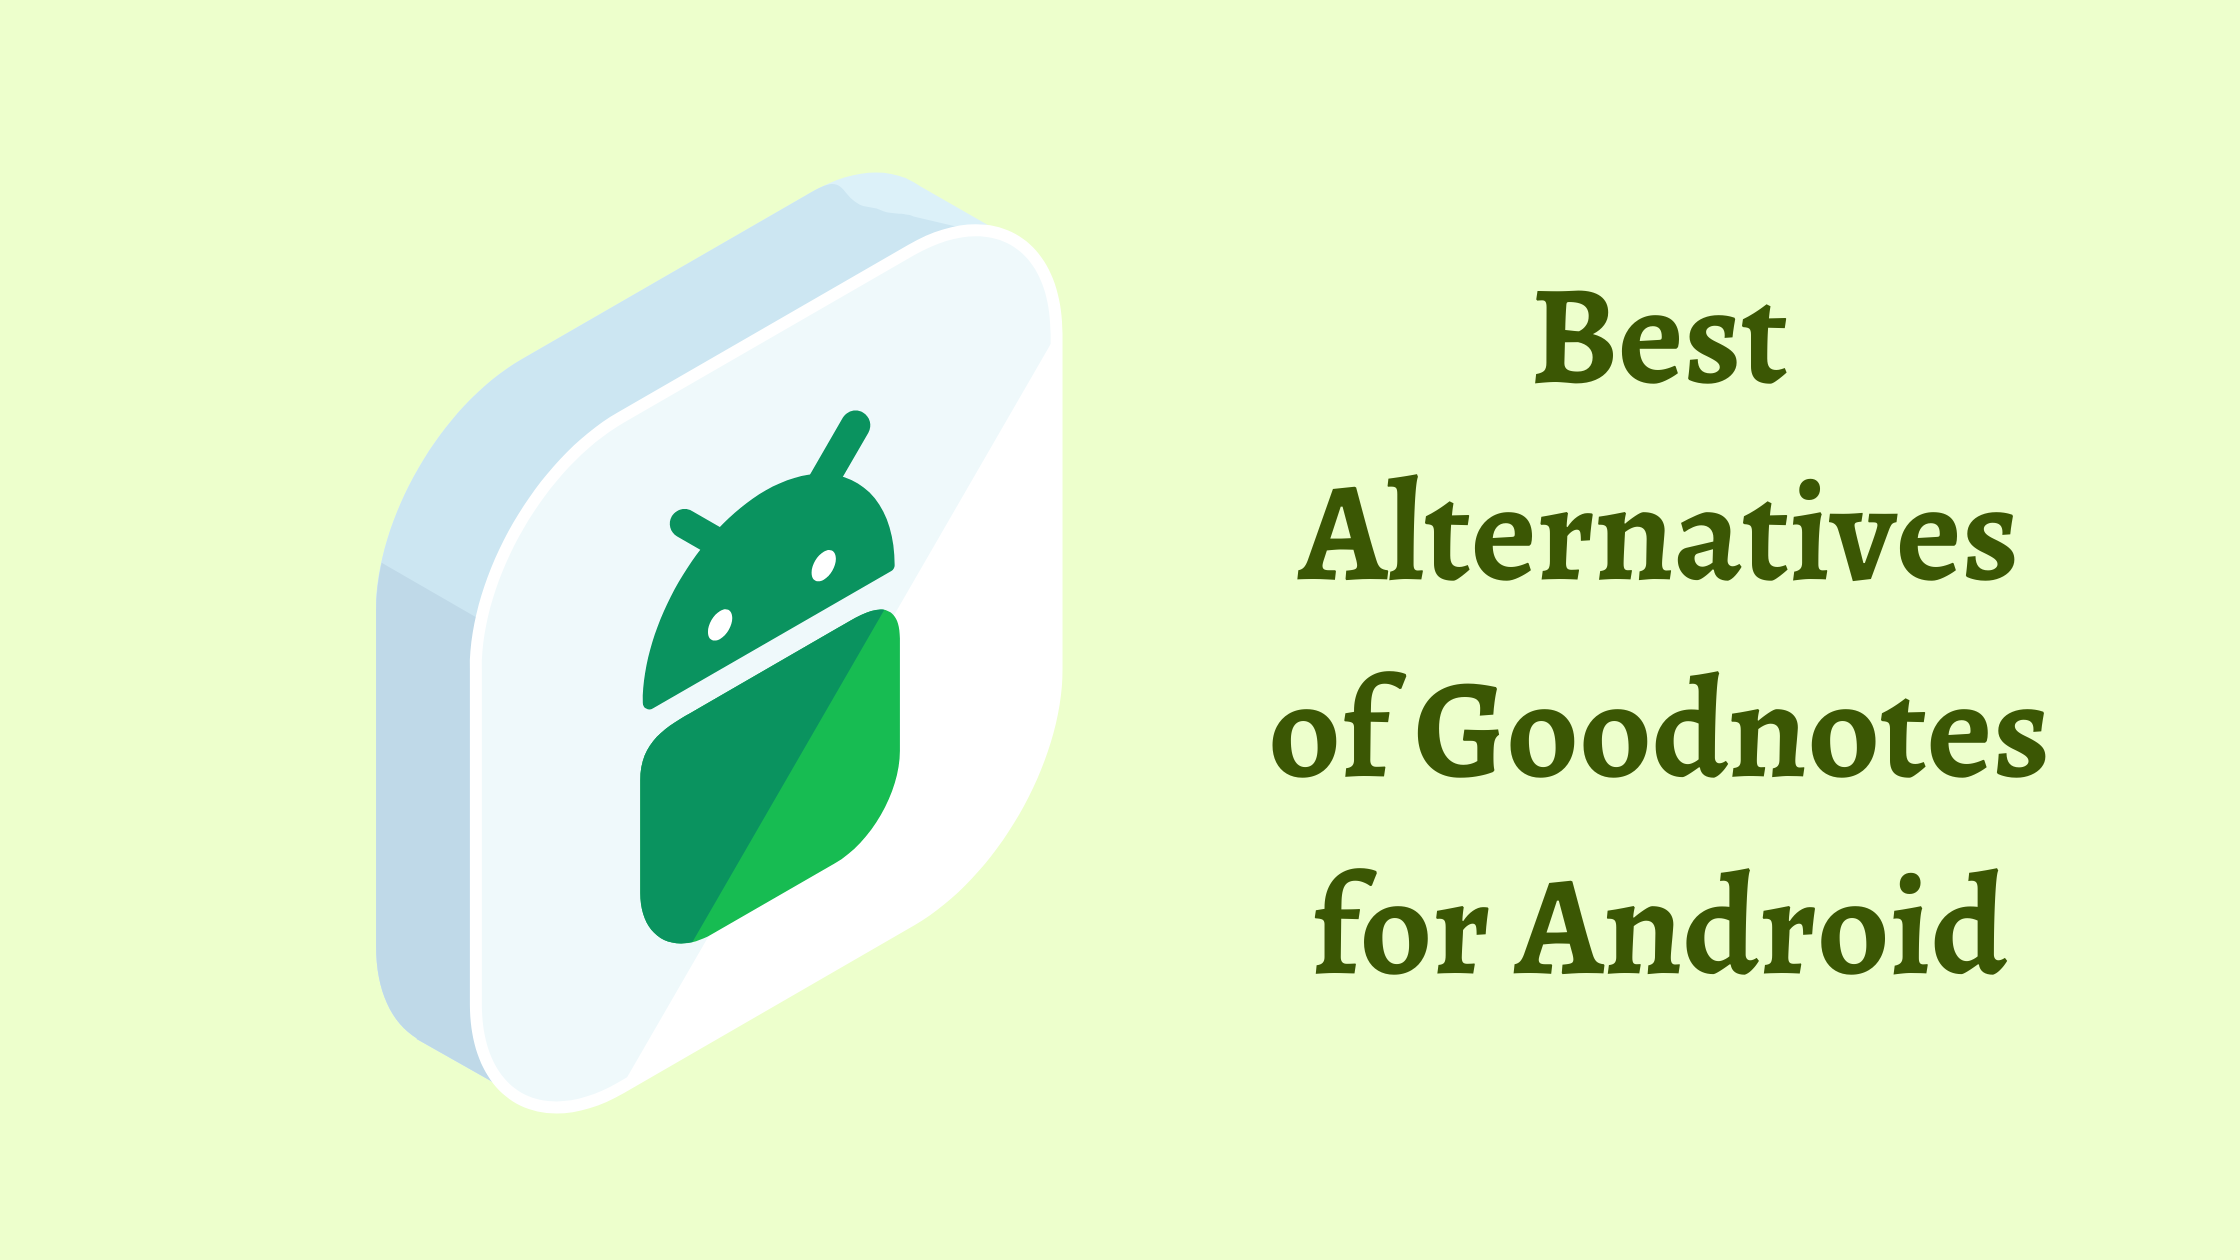 goodnotes alternative for android